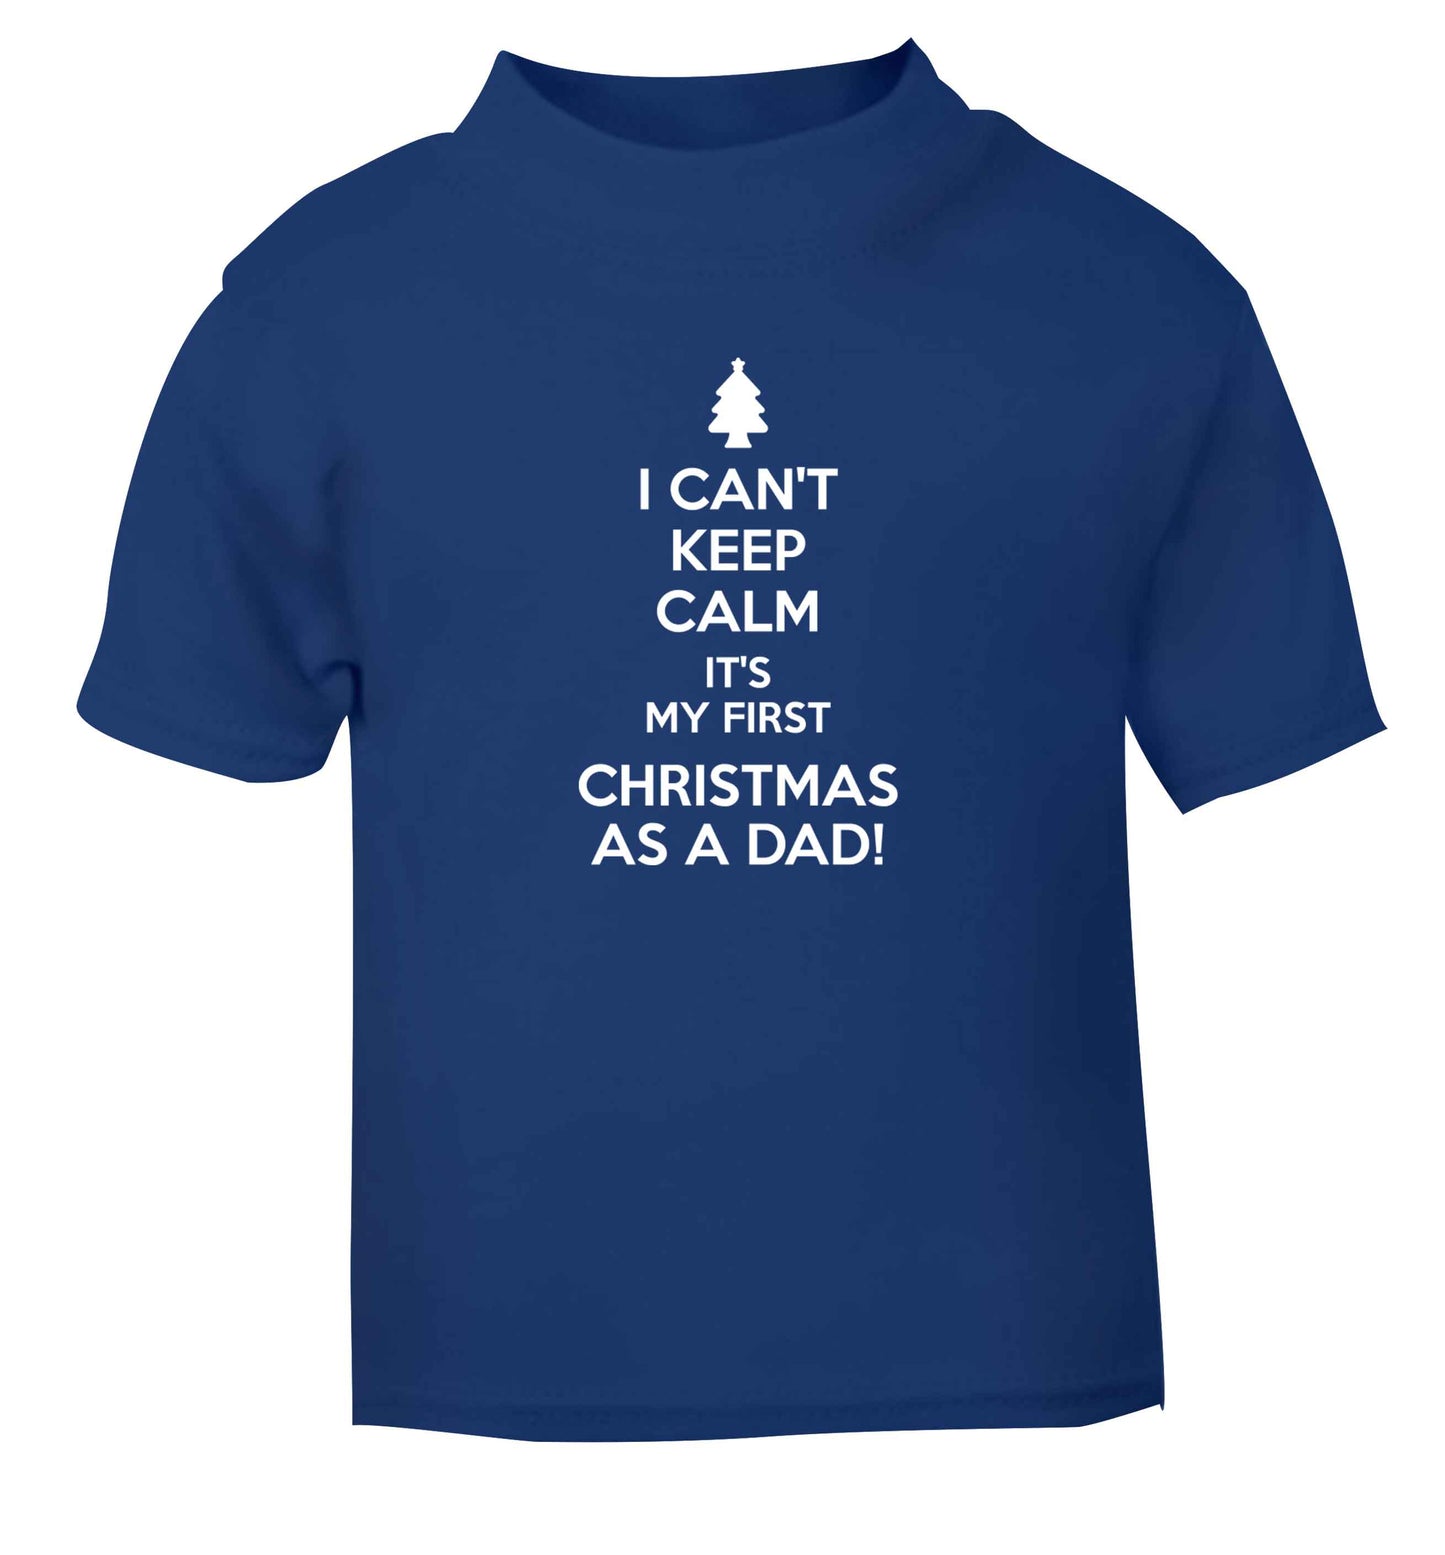 I can't keep calm it's my first Christmas as a dad blue Baby Toddler Tshirt 2 Years